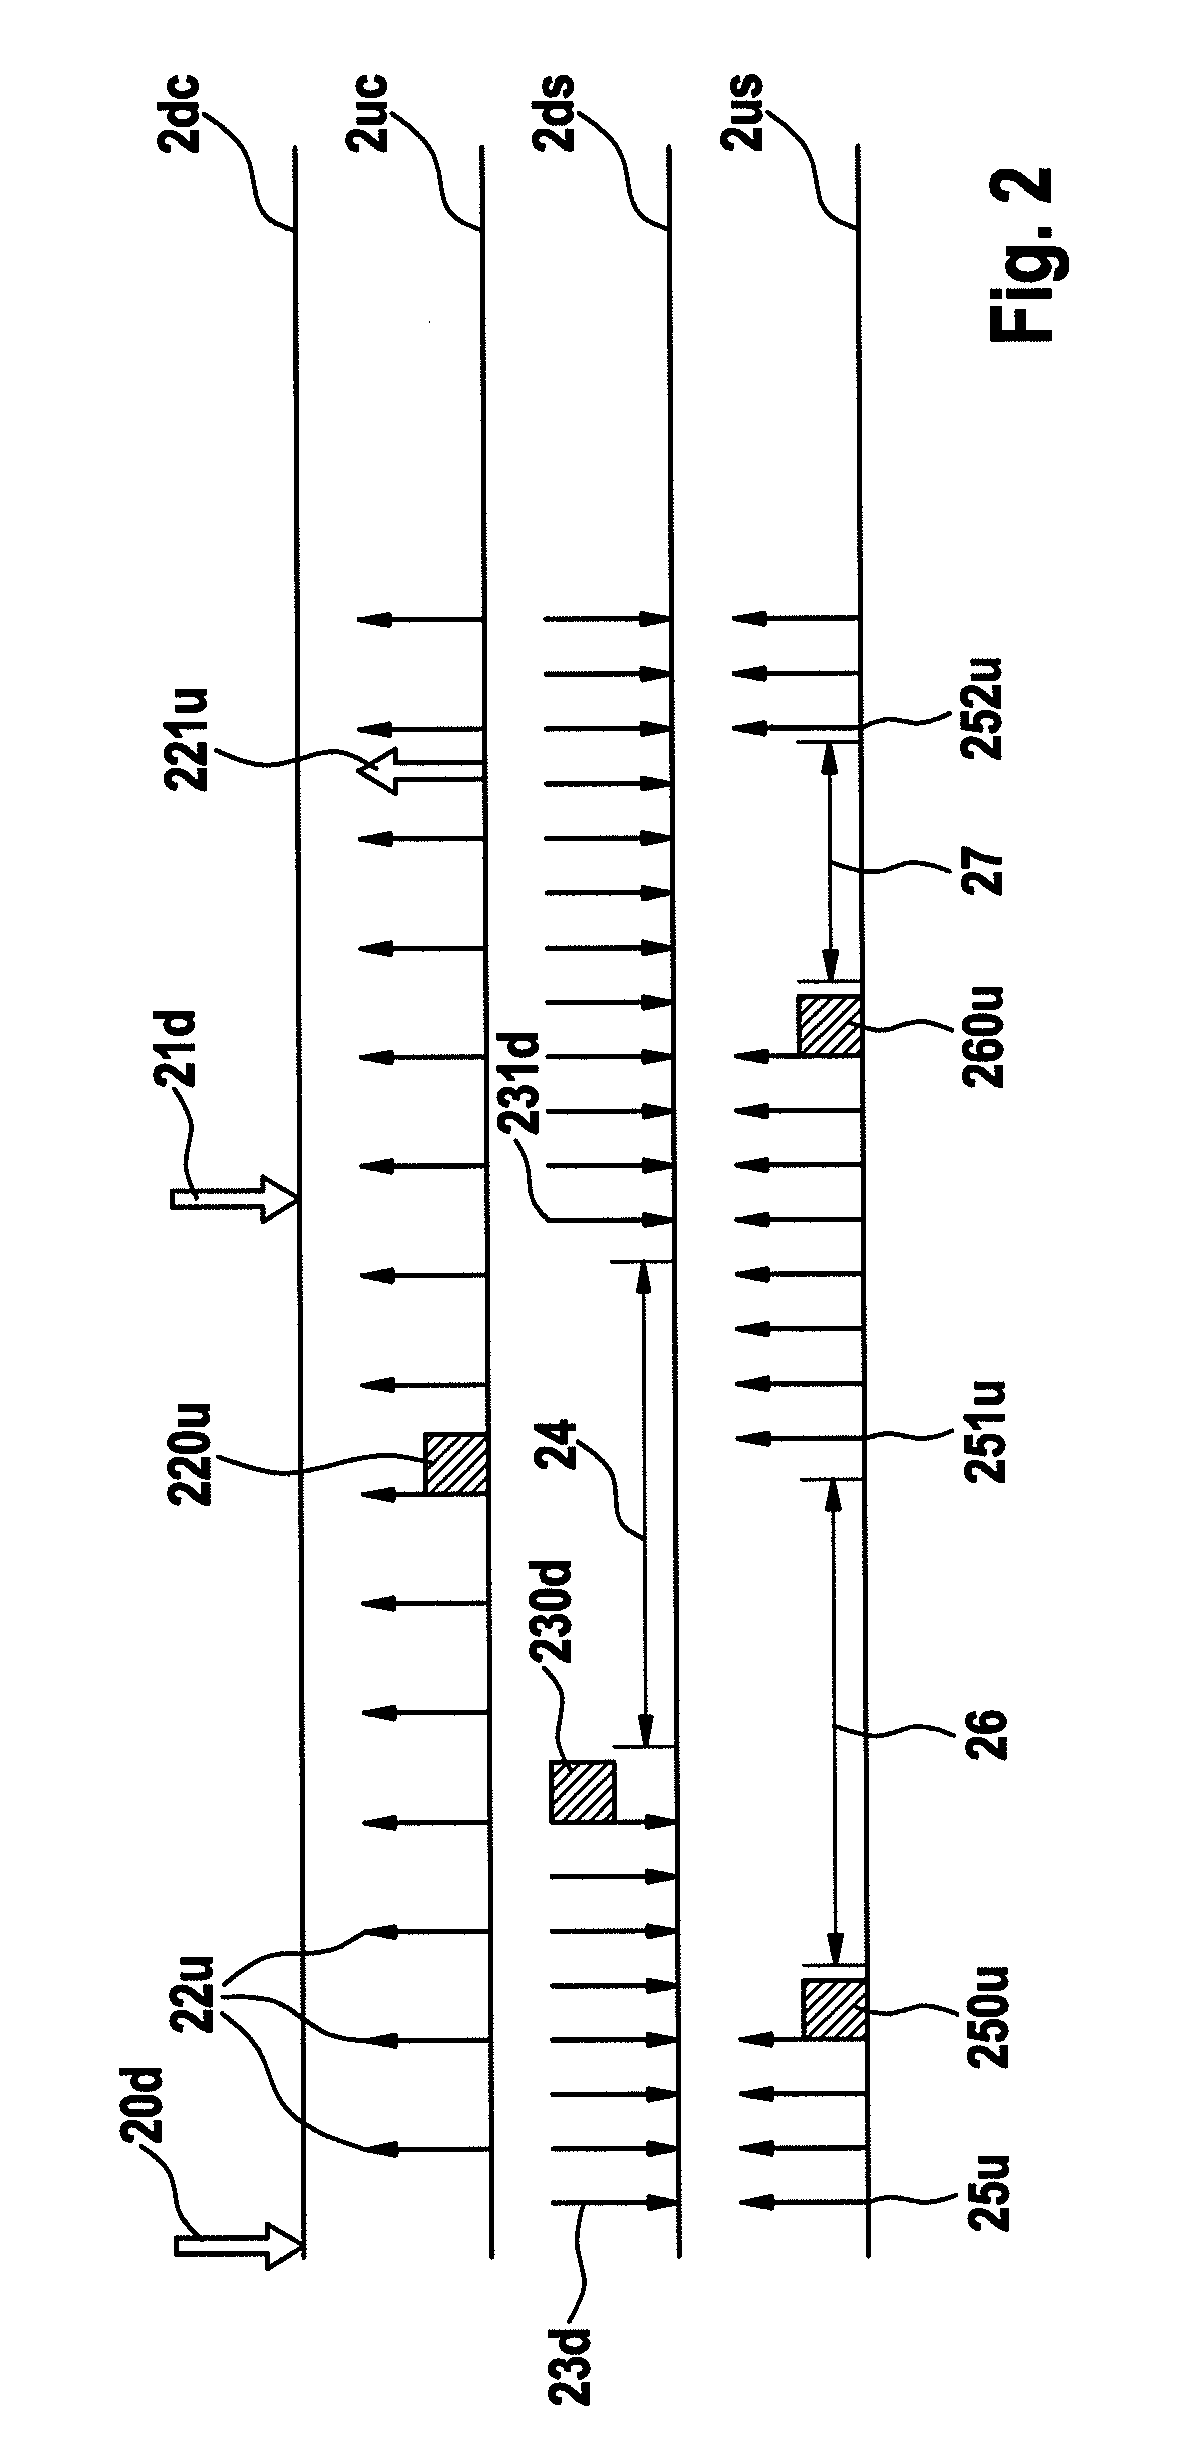 METHOD OF PROVIDING A VoIP CONNECTION